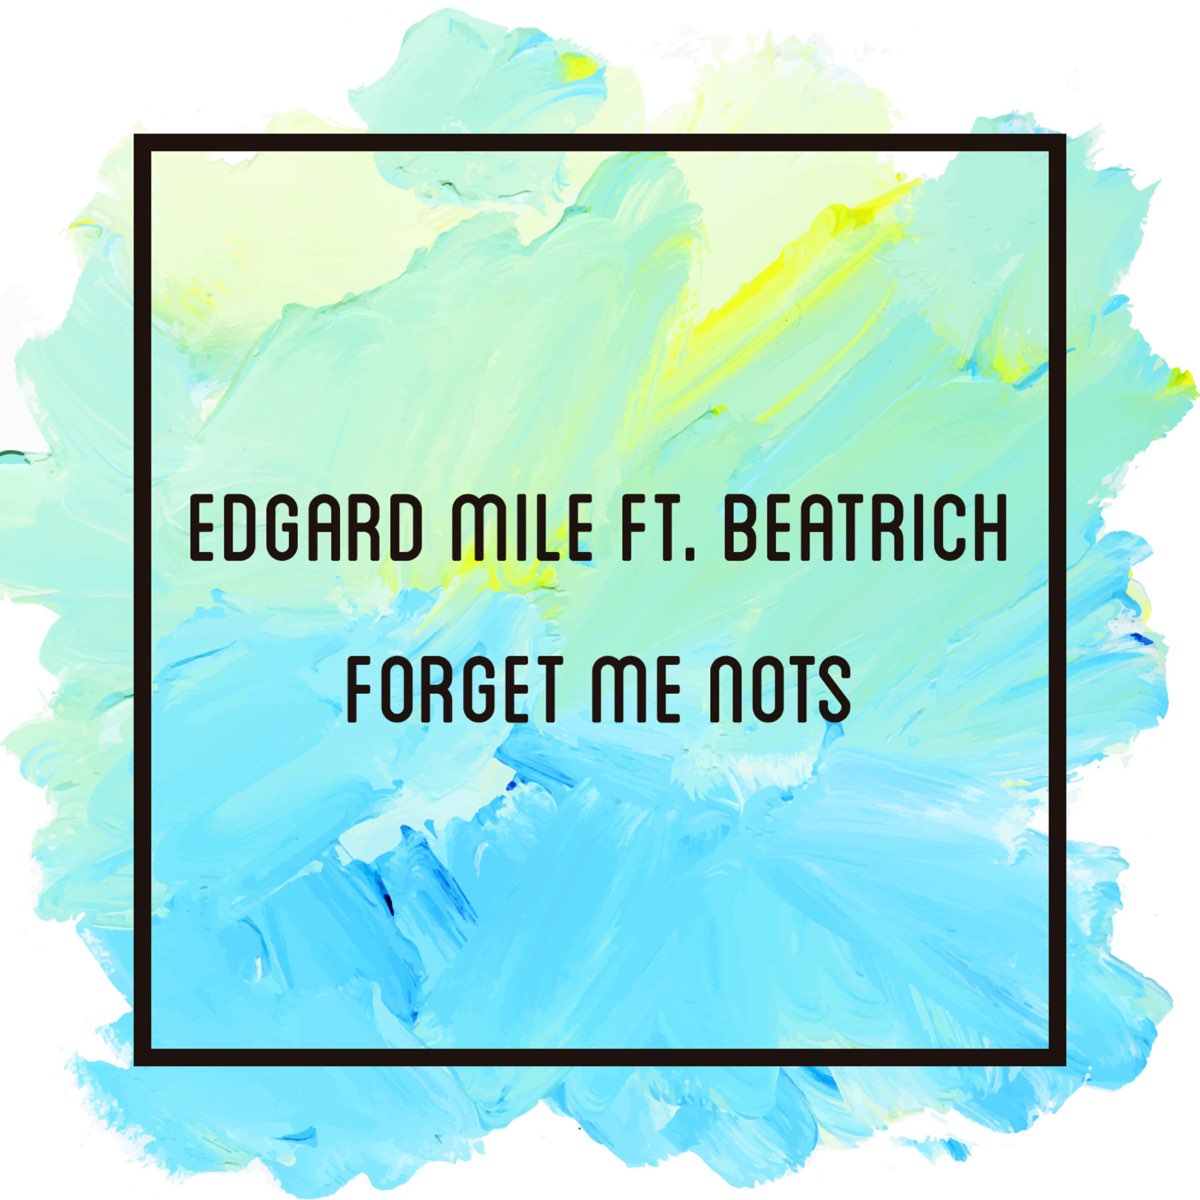 Really you forget me. Edgard Mile ft. Beatrich - forget me nots. Forget me nots песня. Forget me nots слушать. Tryst ft. Lilie - forget me nots.